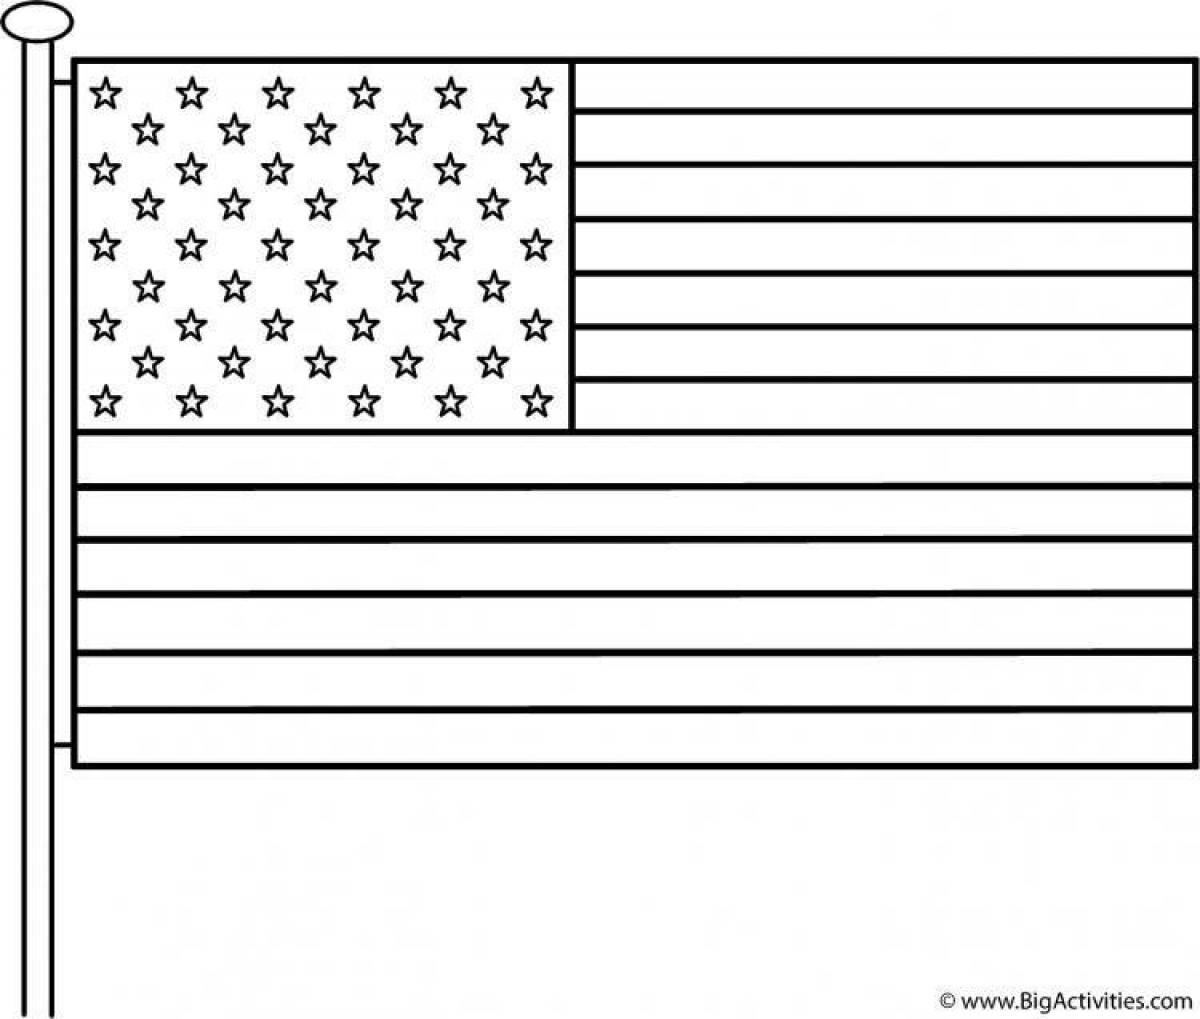 Awesome American flag coloring page